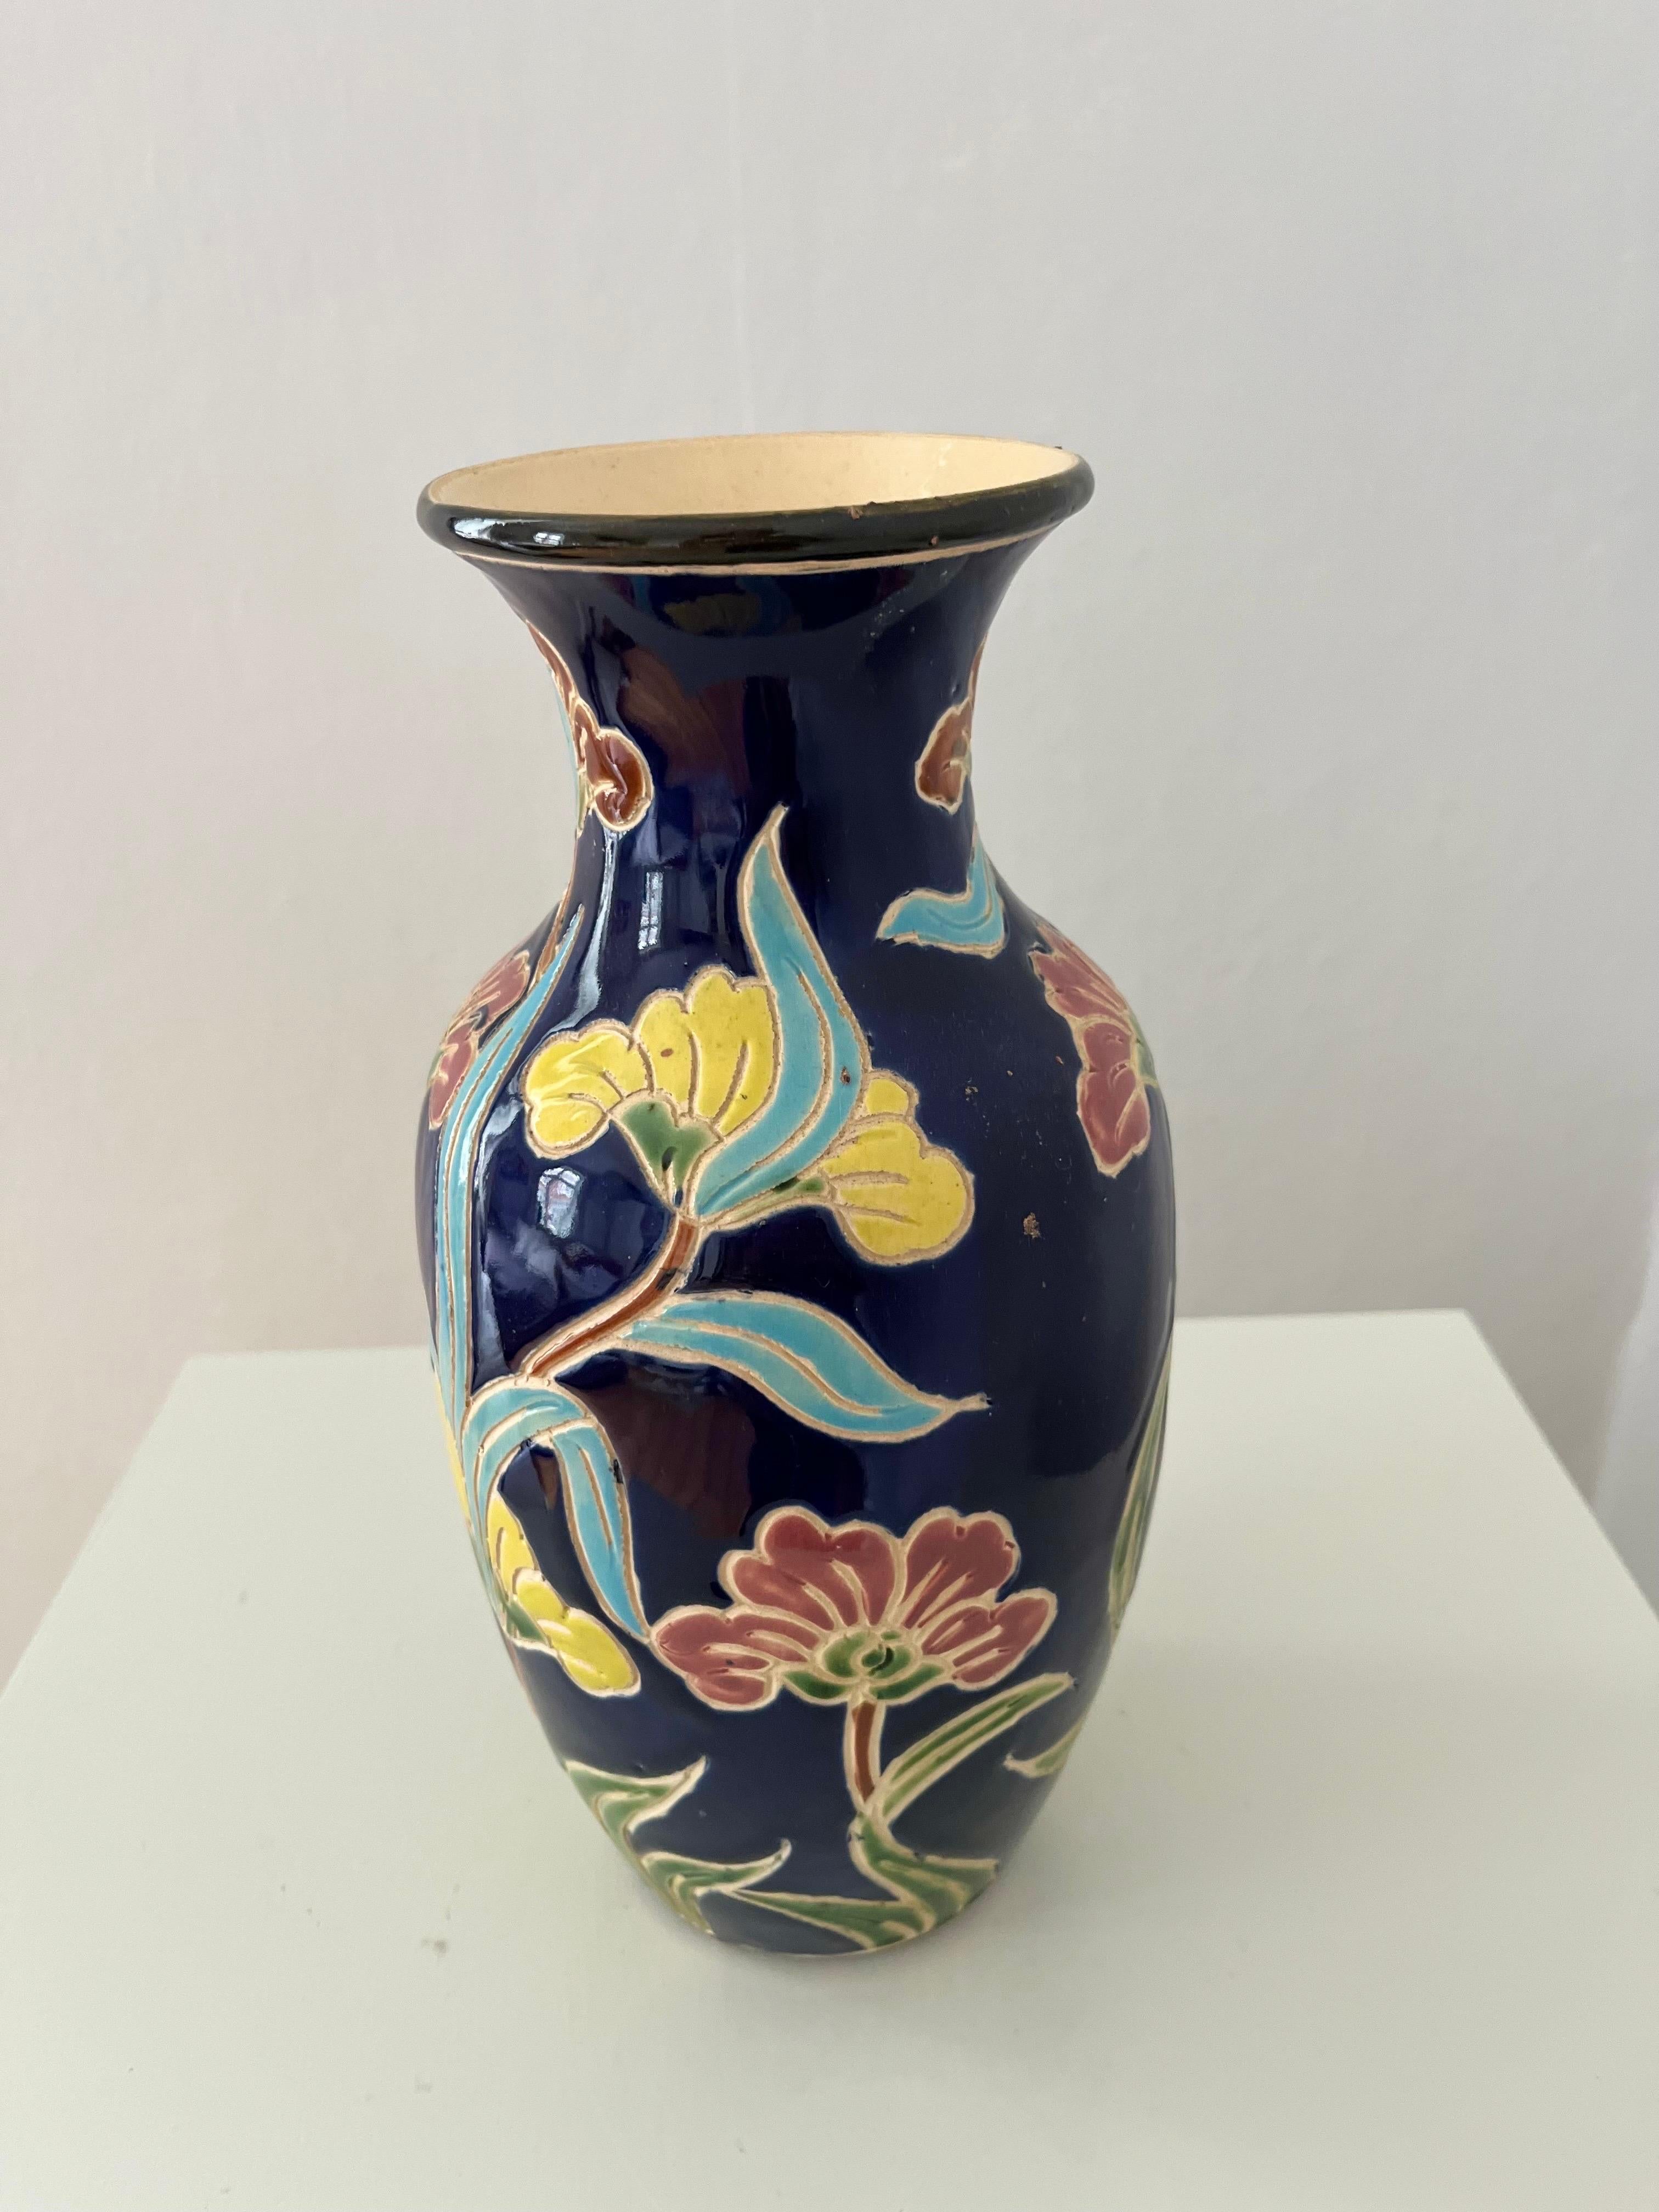 Mid-20th Century 1960s/1970s Scandinavian Organic Modern Ceramic Vase with Colorful Floral Motifs For Sale